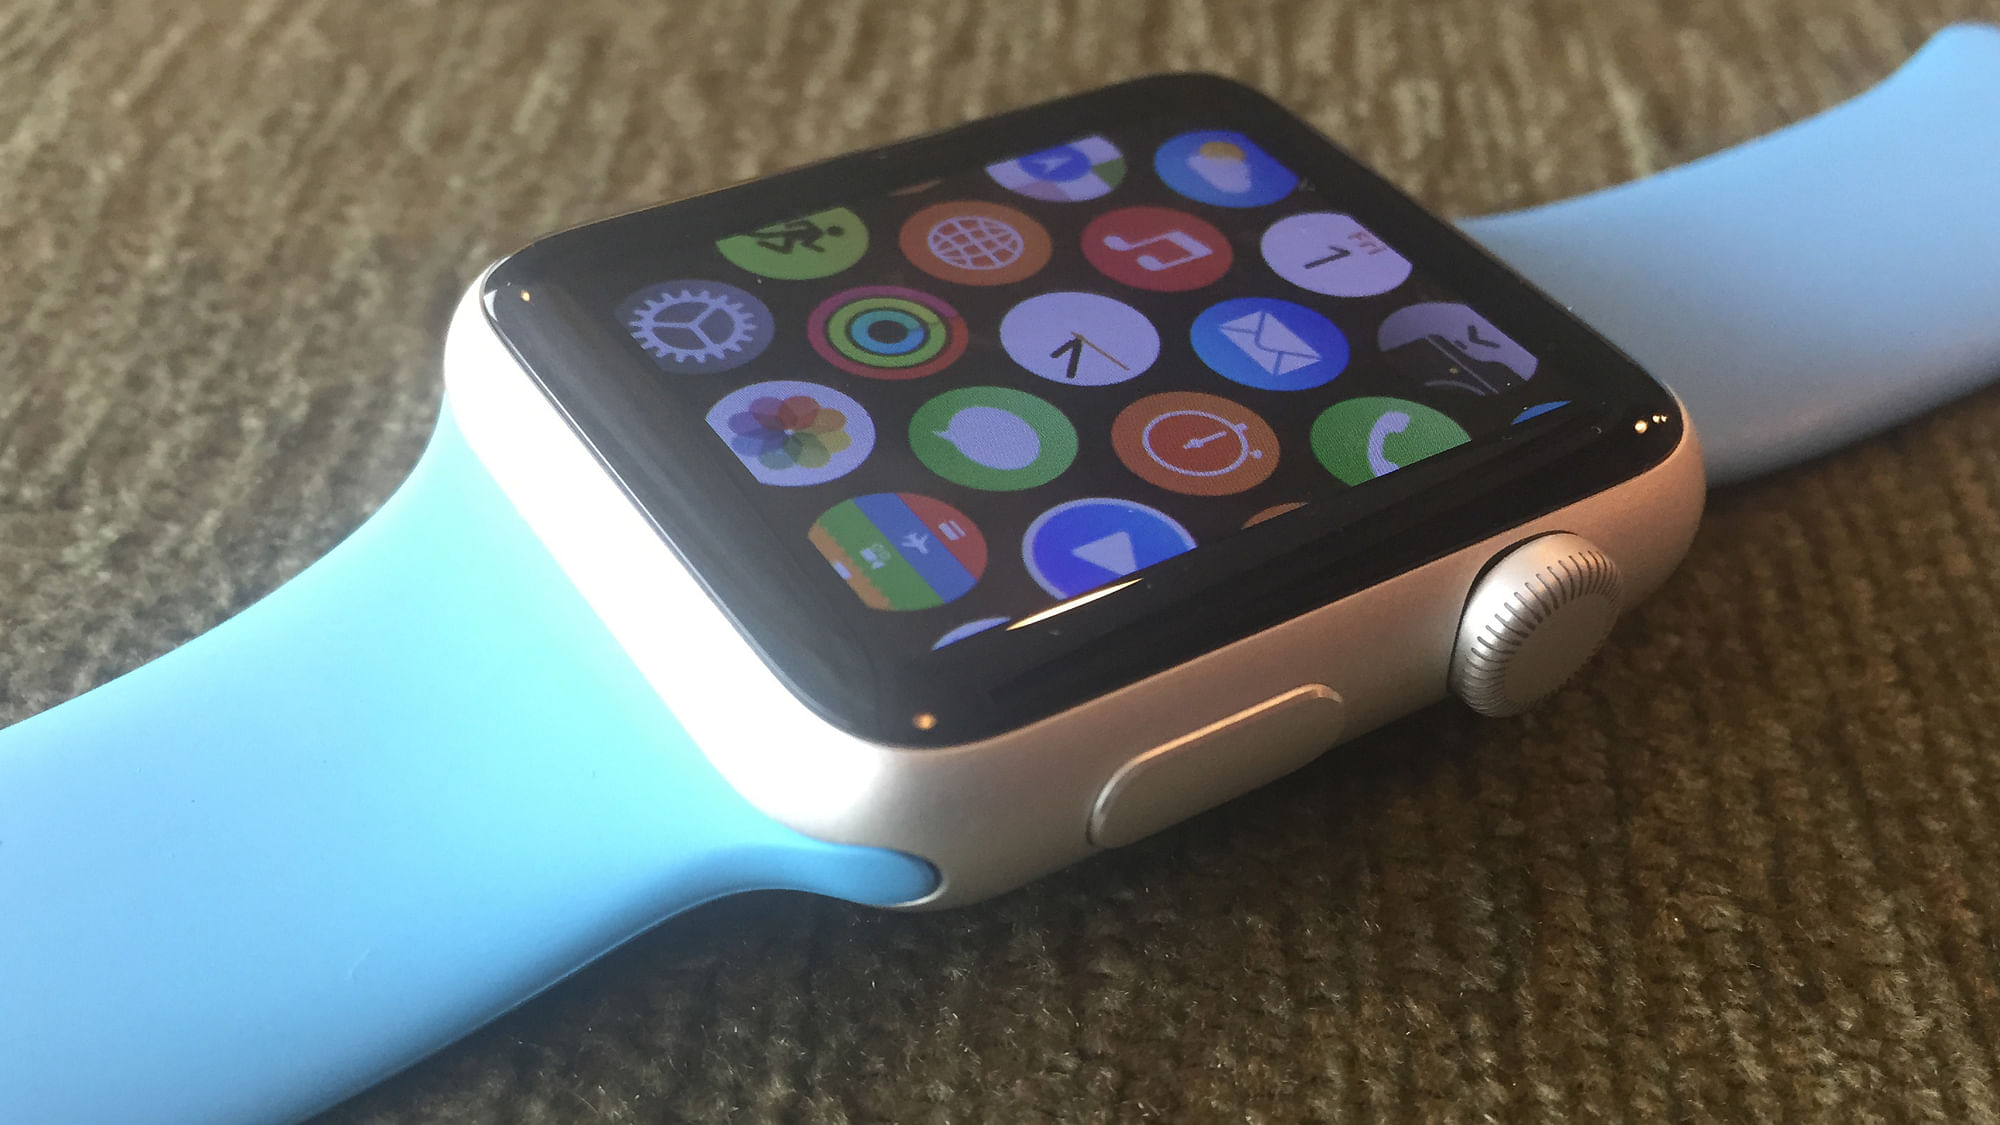 

Apple Watch 42mm Sports Edition (Photo: The Quint)